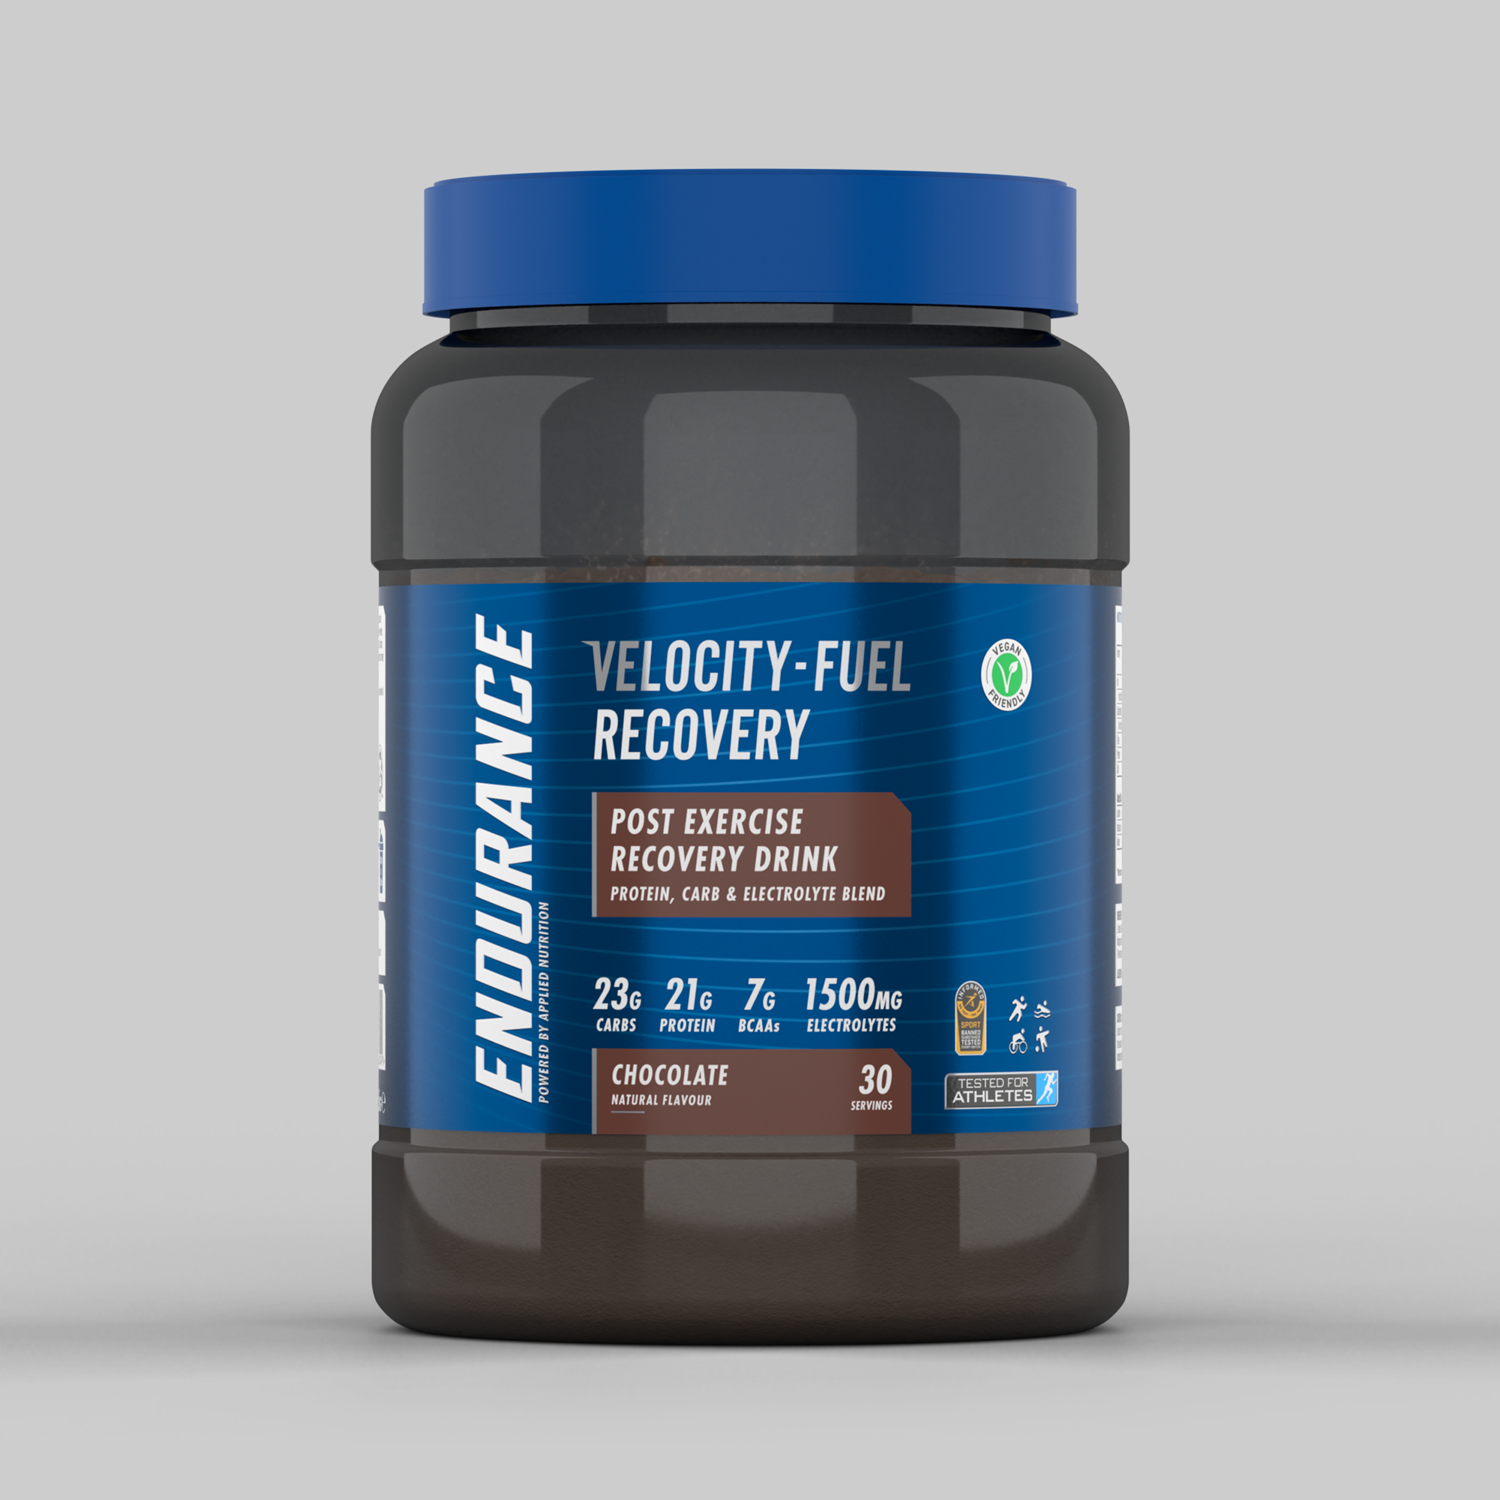 Velocity-Fuel Recovery / Post Exercise Recovery Drink | Endurance Applied Nutrition Ltd